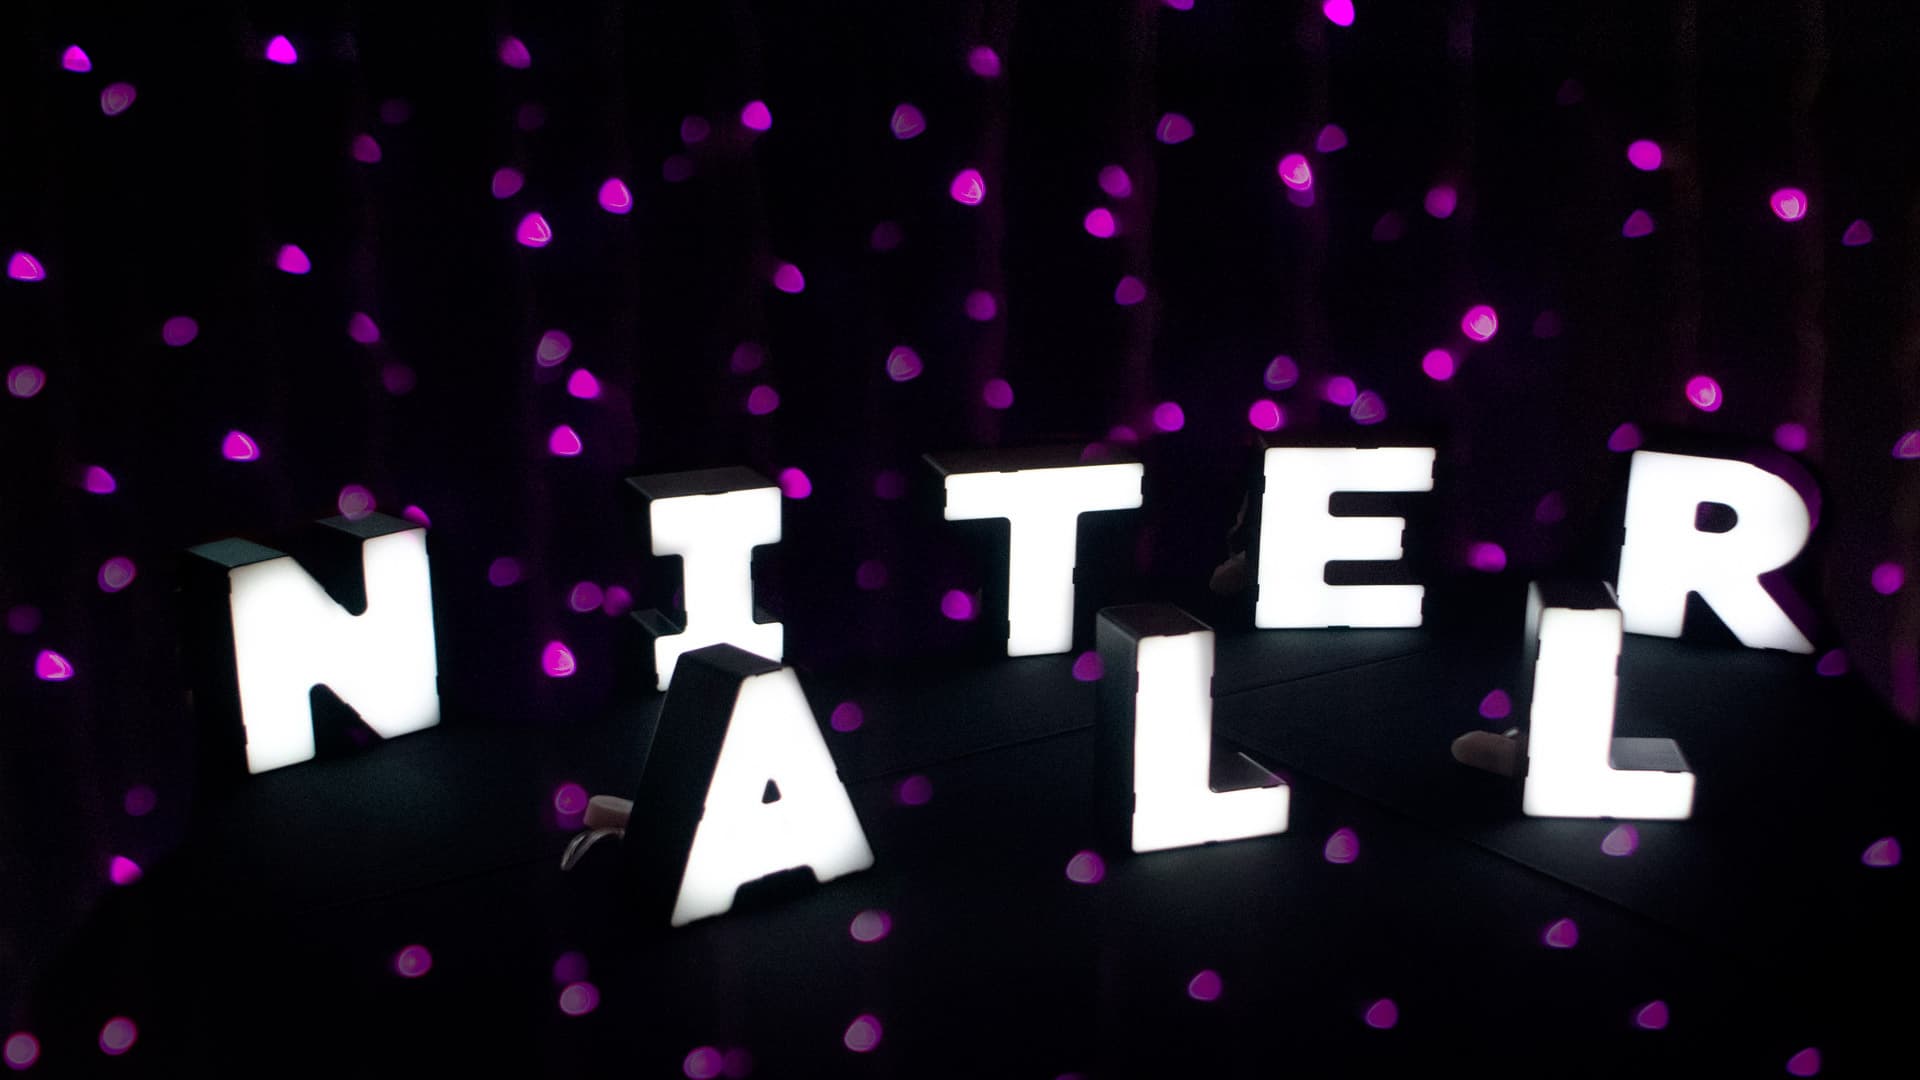 All Niter written on black background with pink polka dots